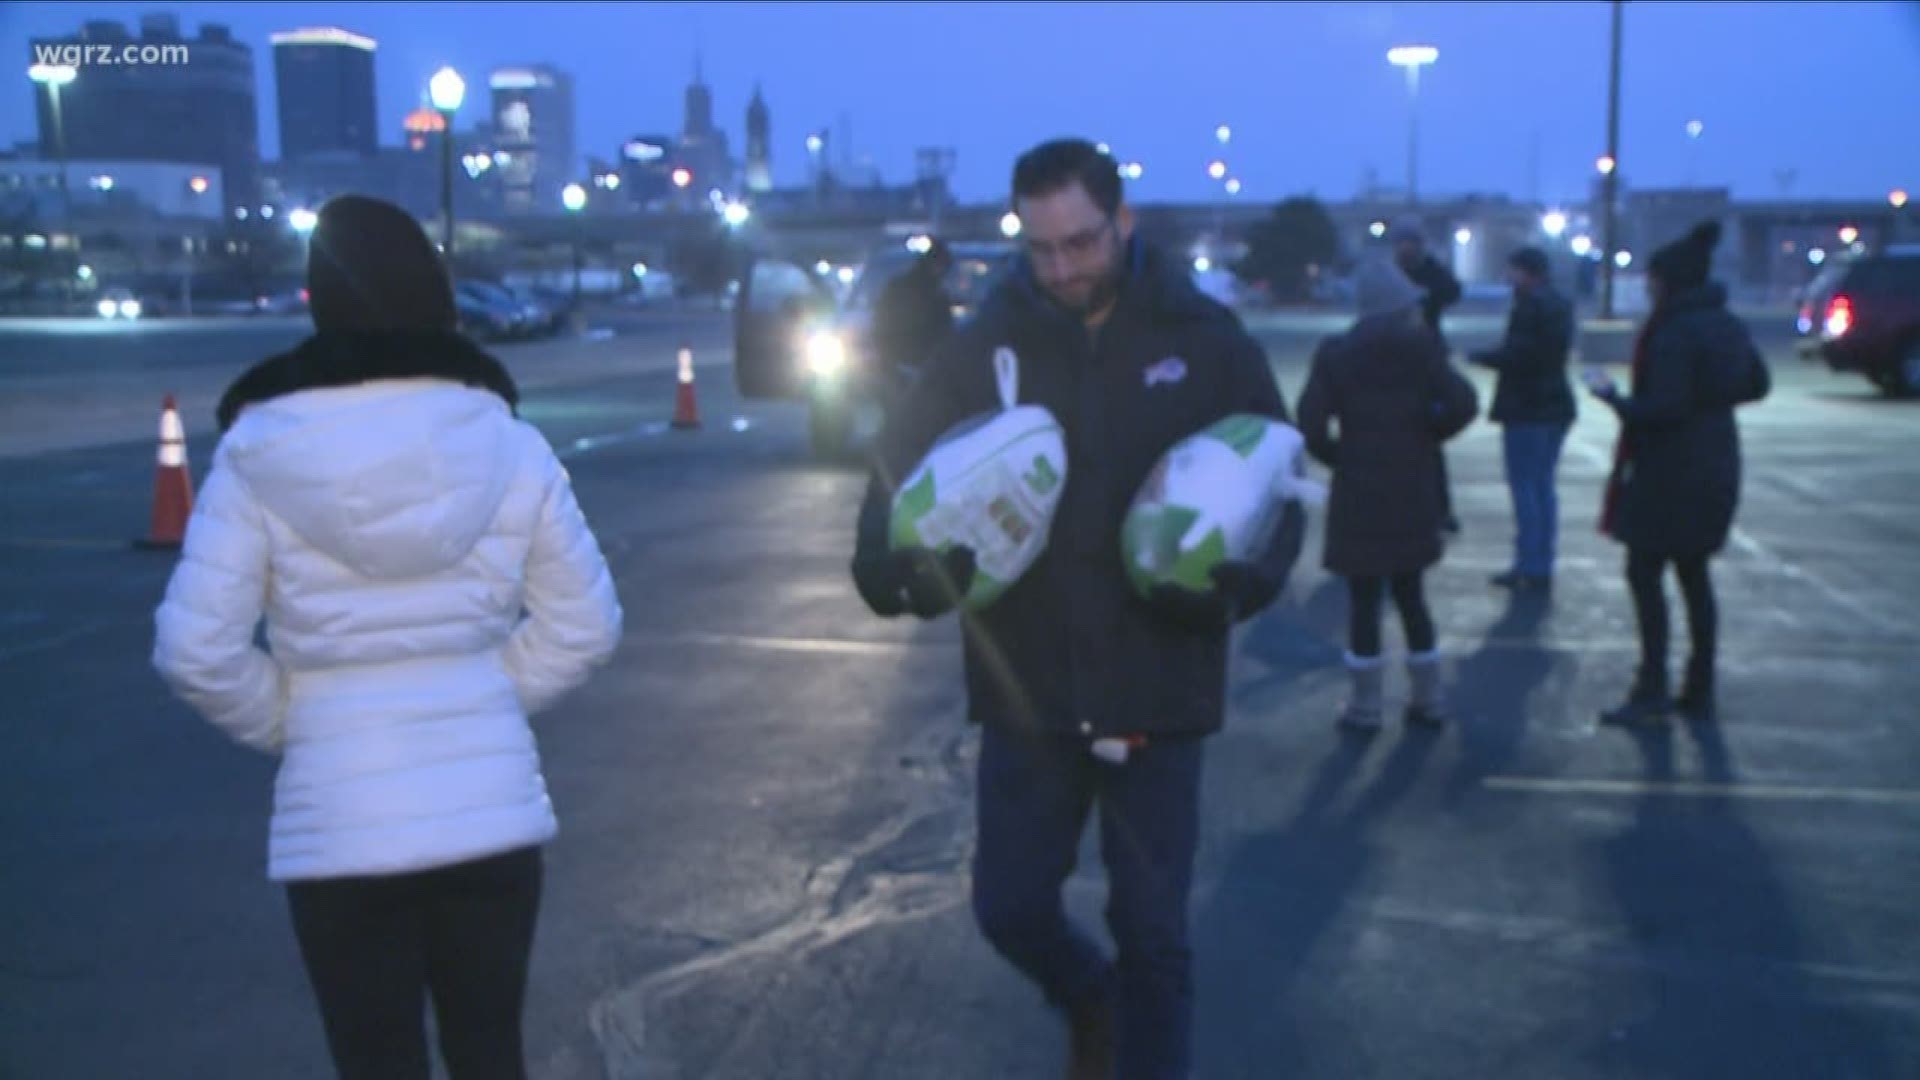 Fans donated 20-pound turkeys to local organizations that fight hunger... in exchange for a pair of tickets to an upcoming game.